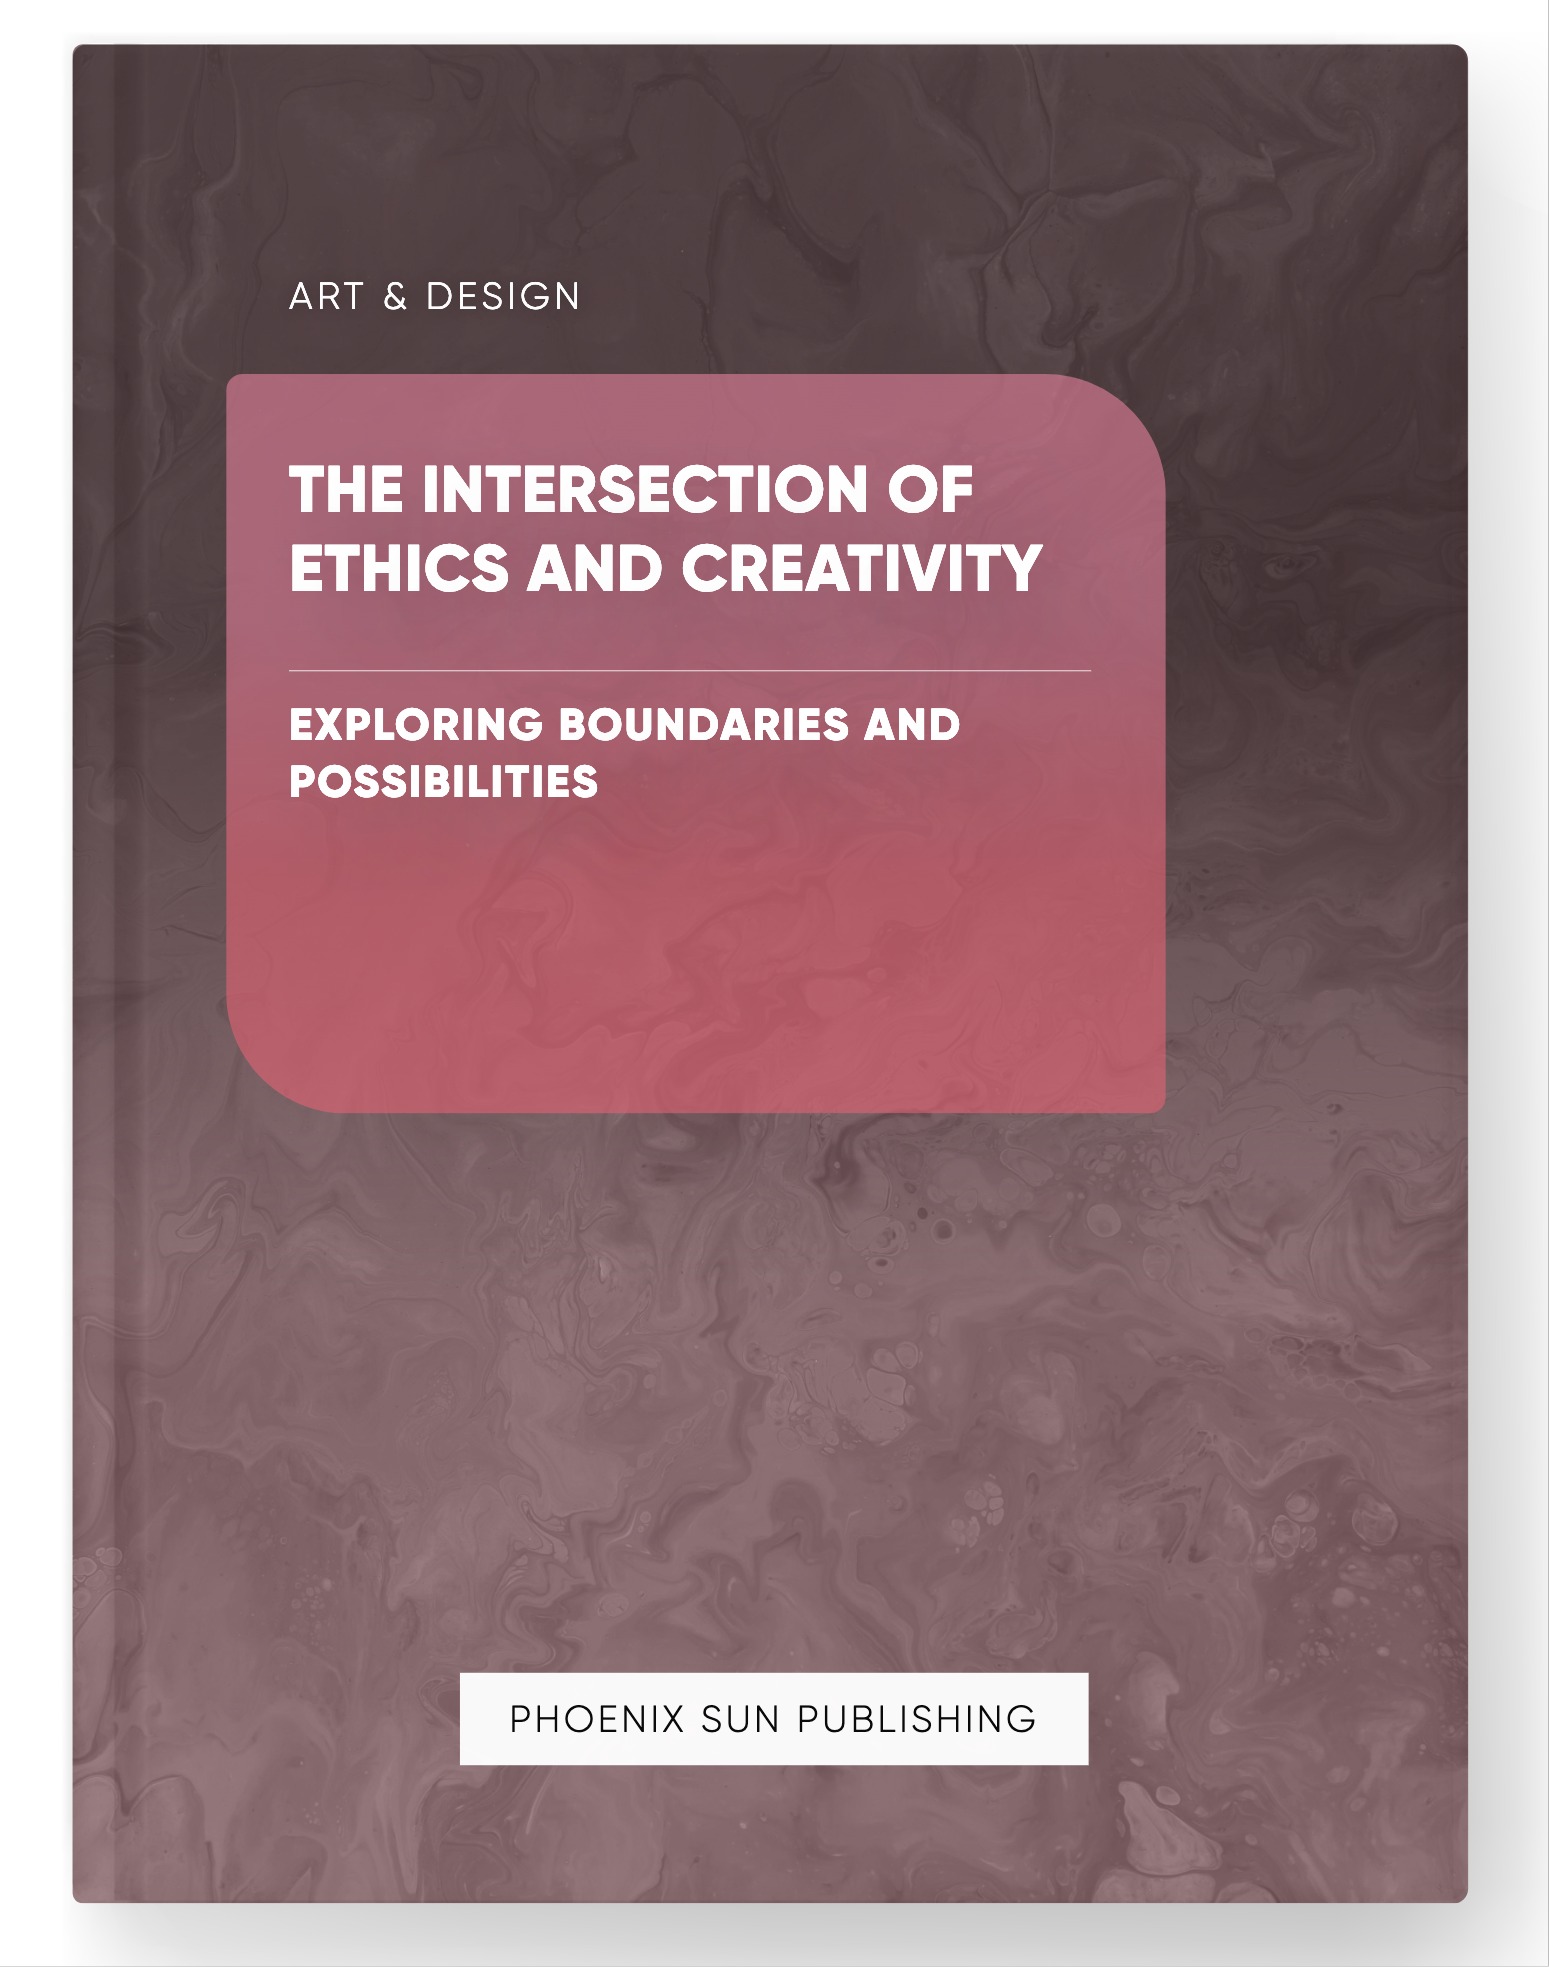 The Intersection of Ethics and Creativity – Exploring Boundaries and Possibilities